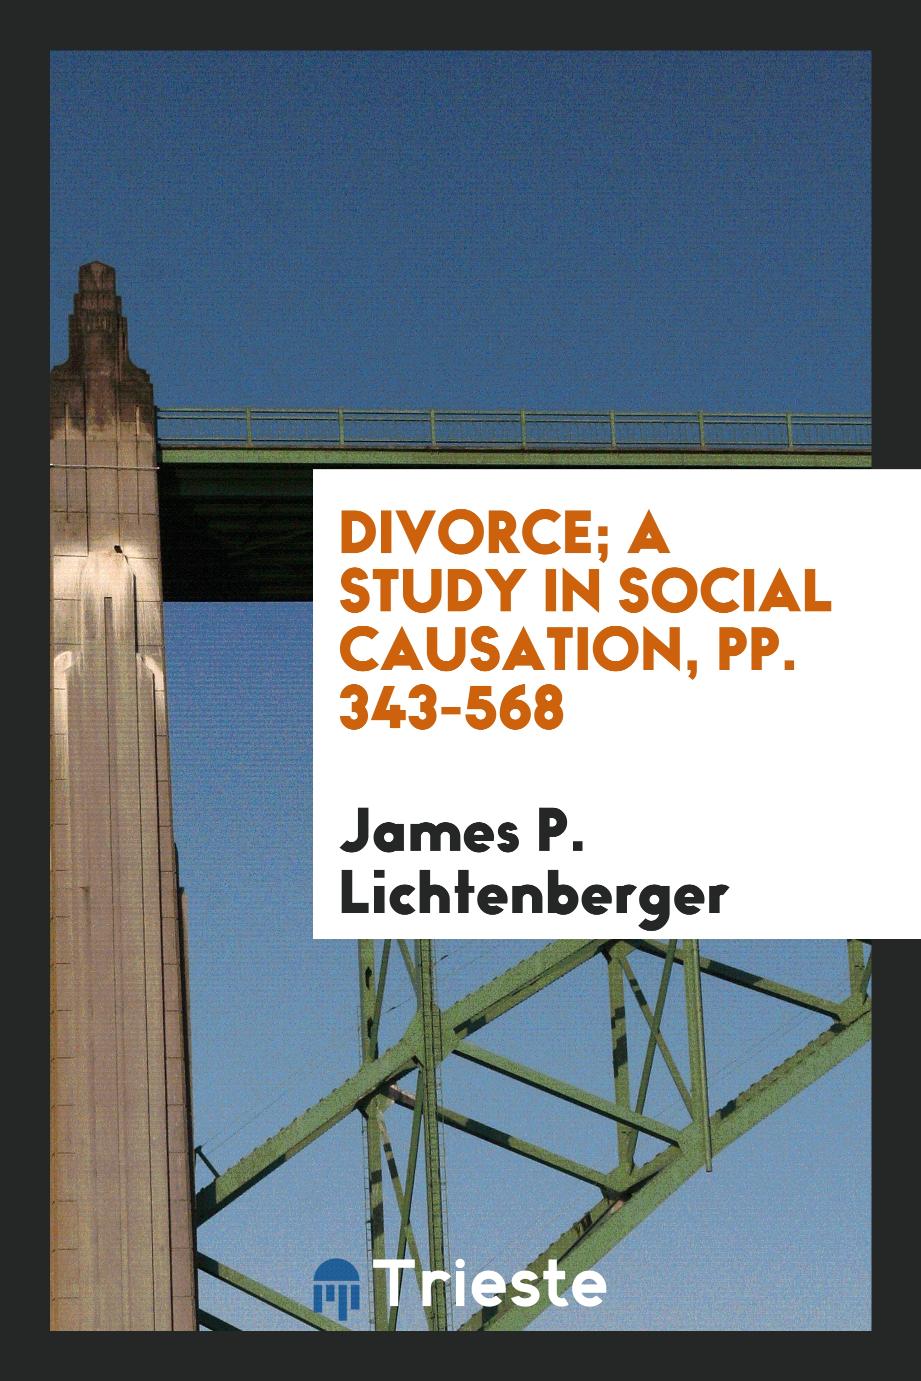 Divorce; a study in social causation, pp. 343-568